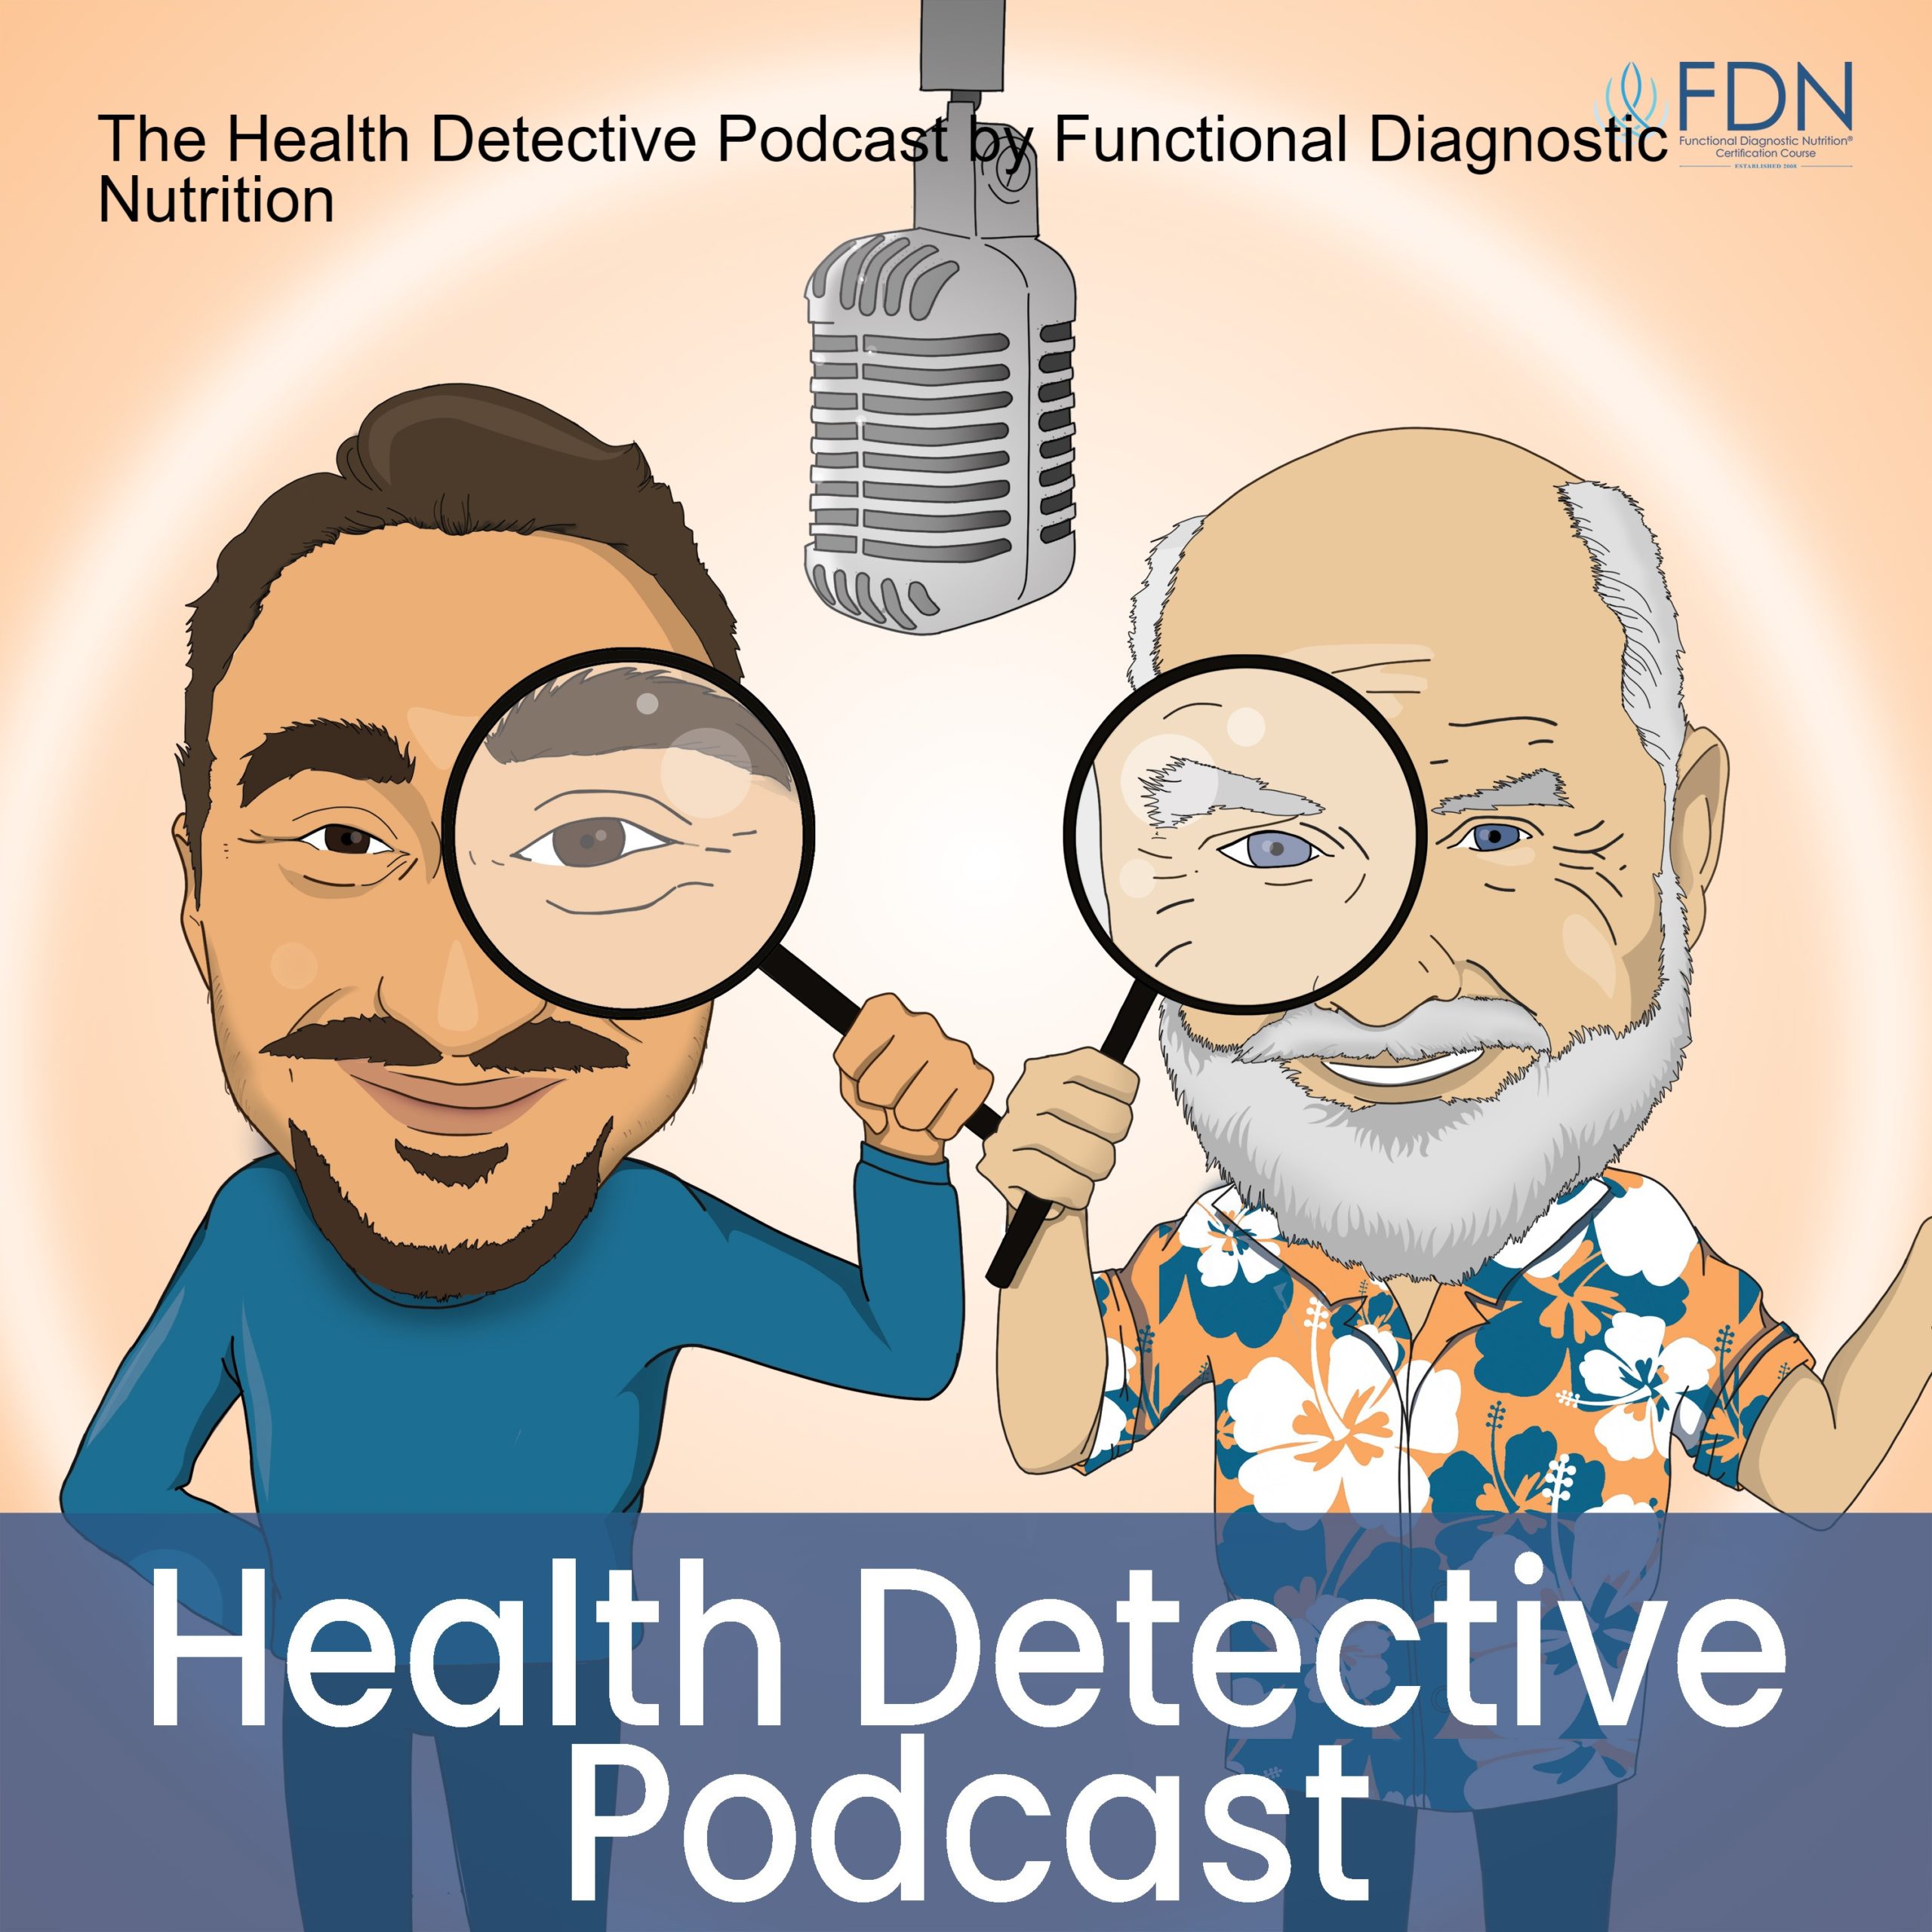 Guest Appearance On The Health Detective Podcast